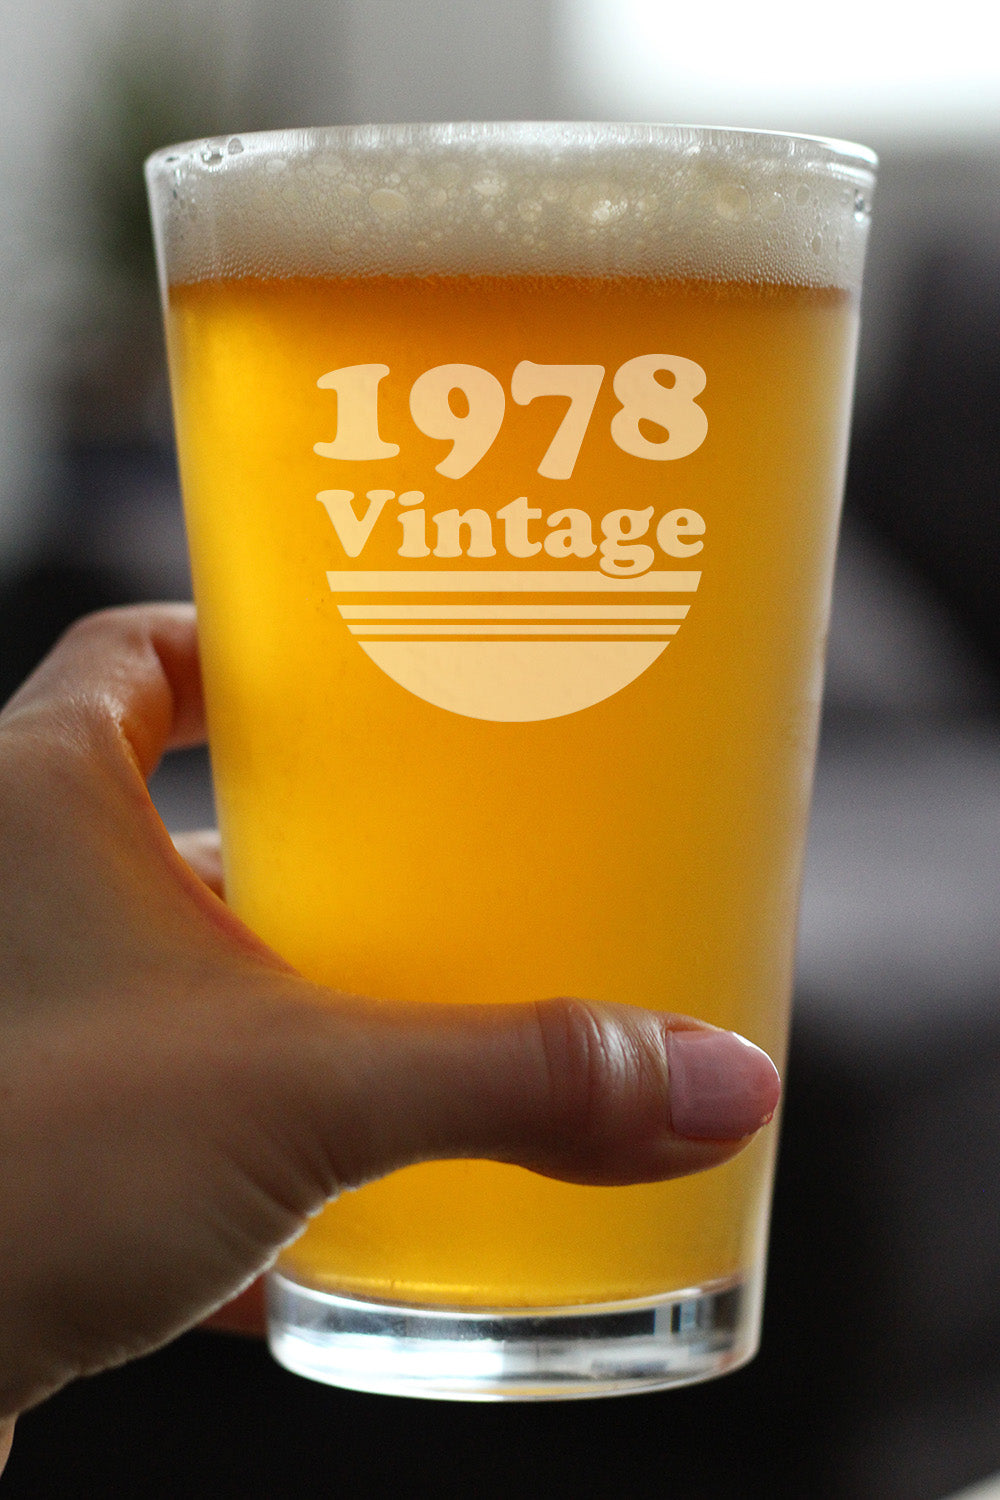 Vintage 1978 - Pint Glass for Beer - 46th Birthday Gifts for Men or Women Turning 46 - Fun Bday Party Decor - 16 oz